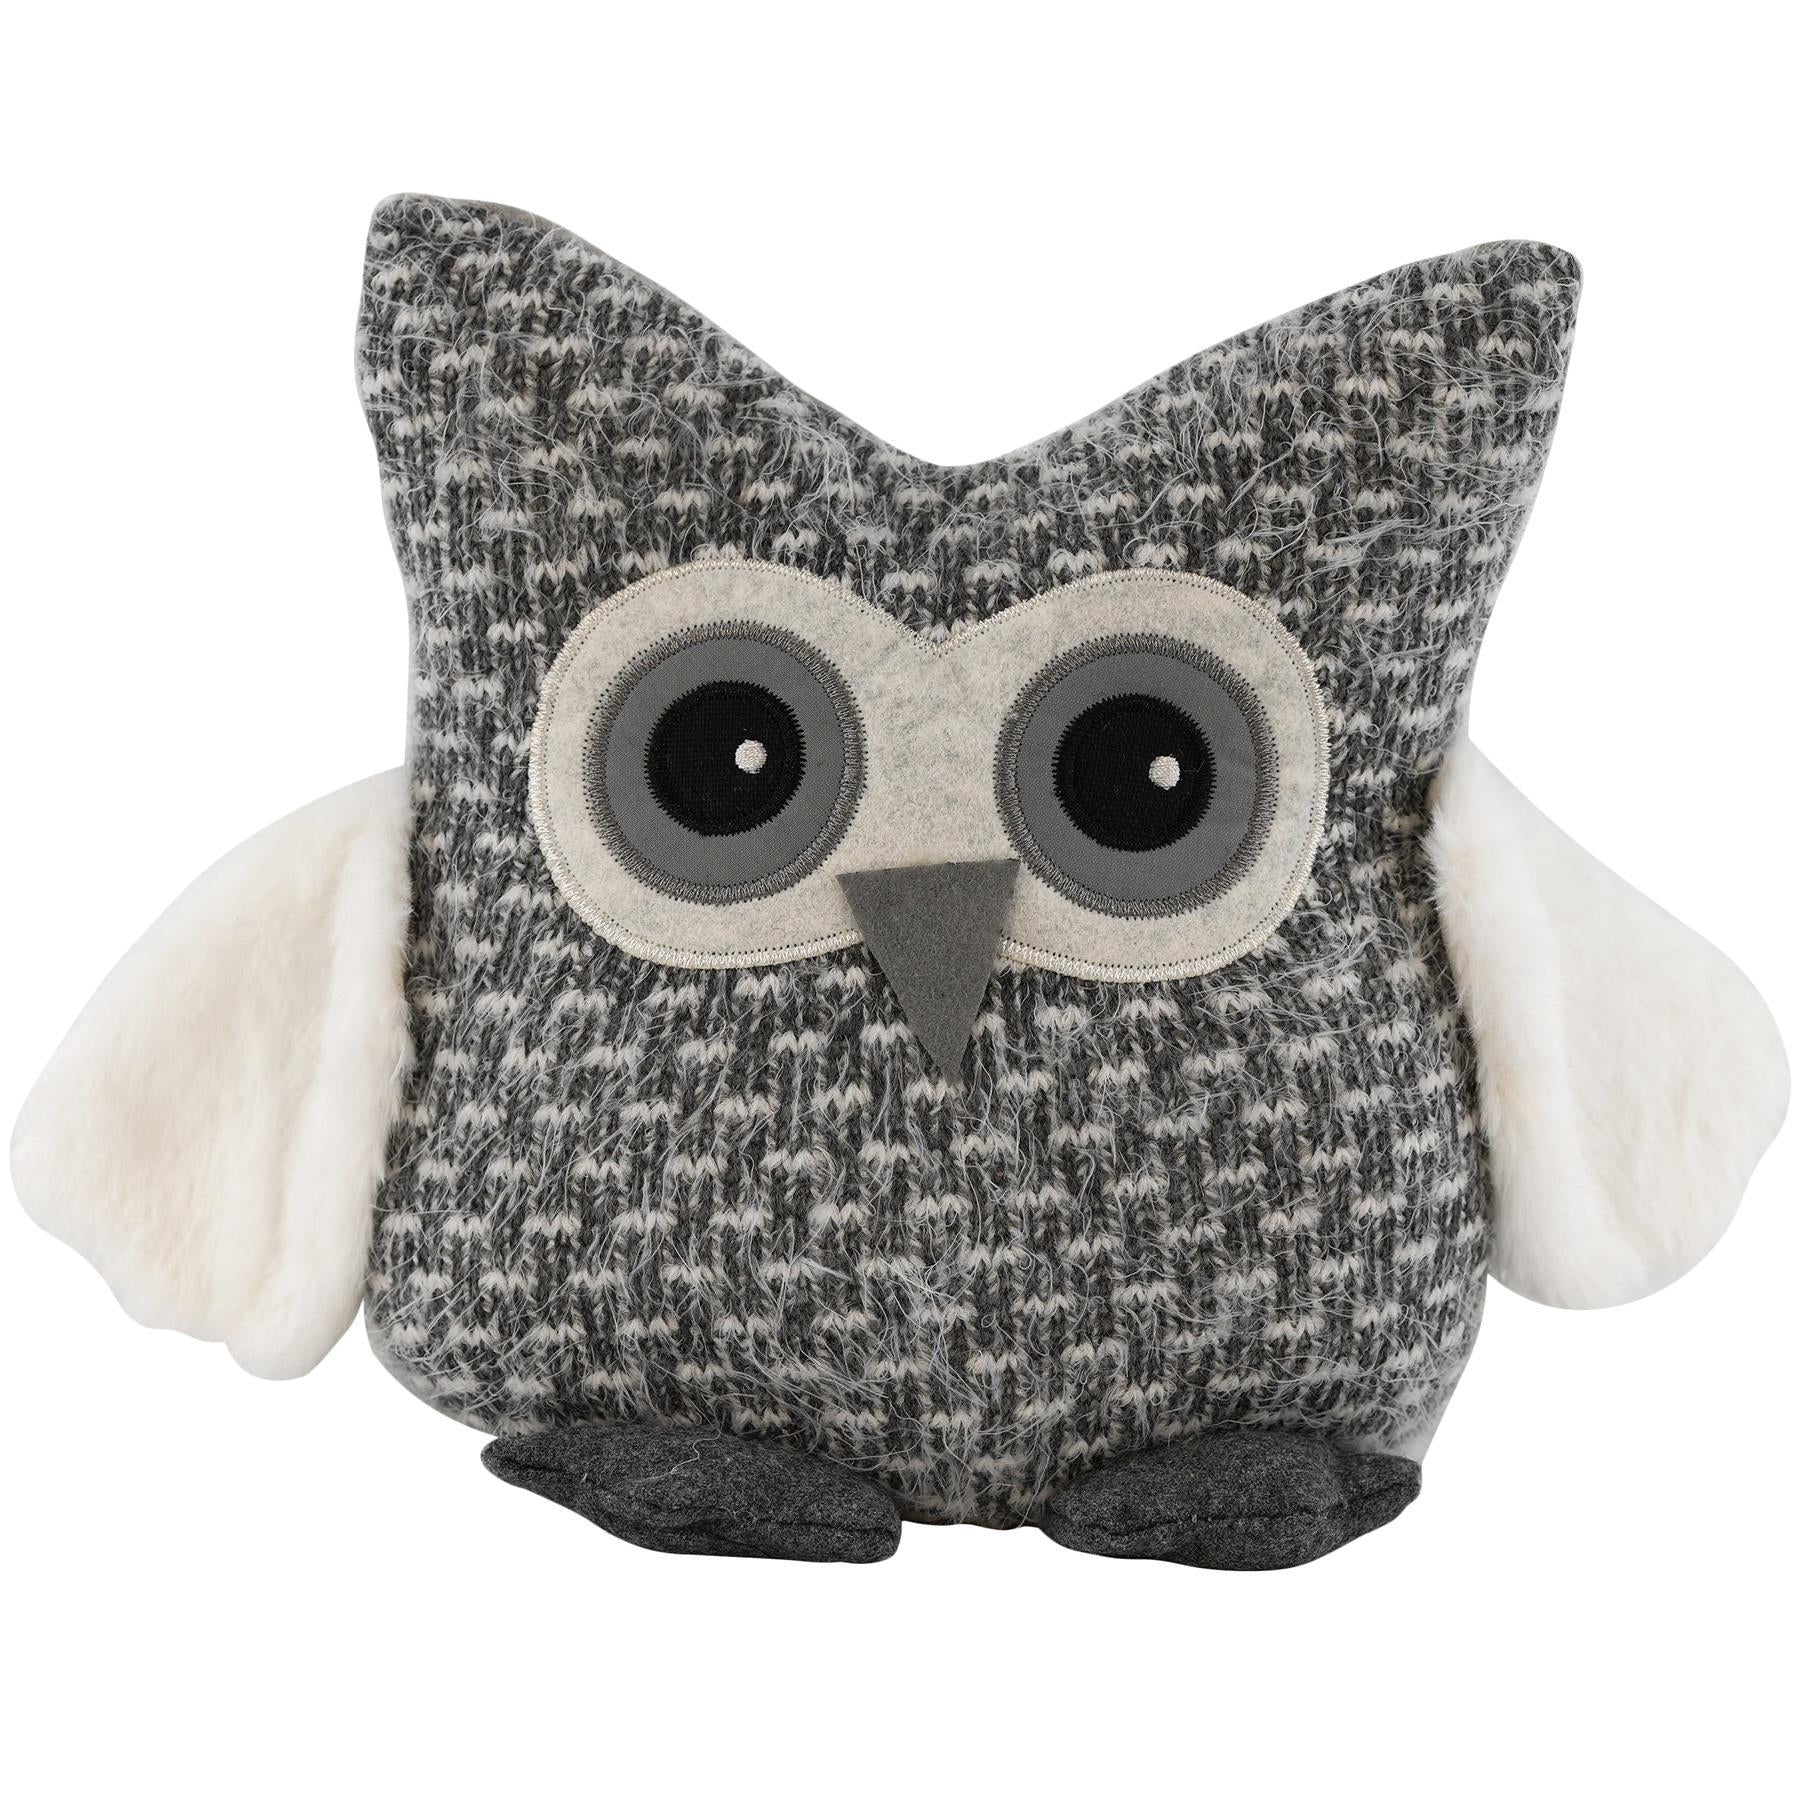 Owl Door Stopper by The Magic Toy Shop - The Magic Toy Shop